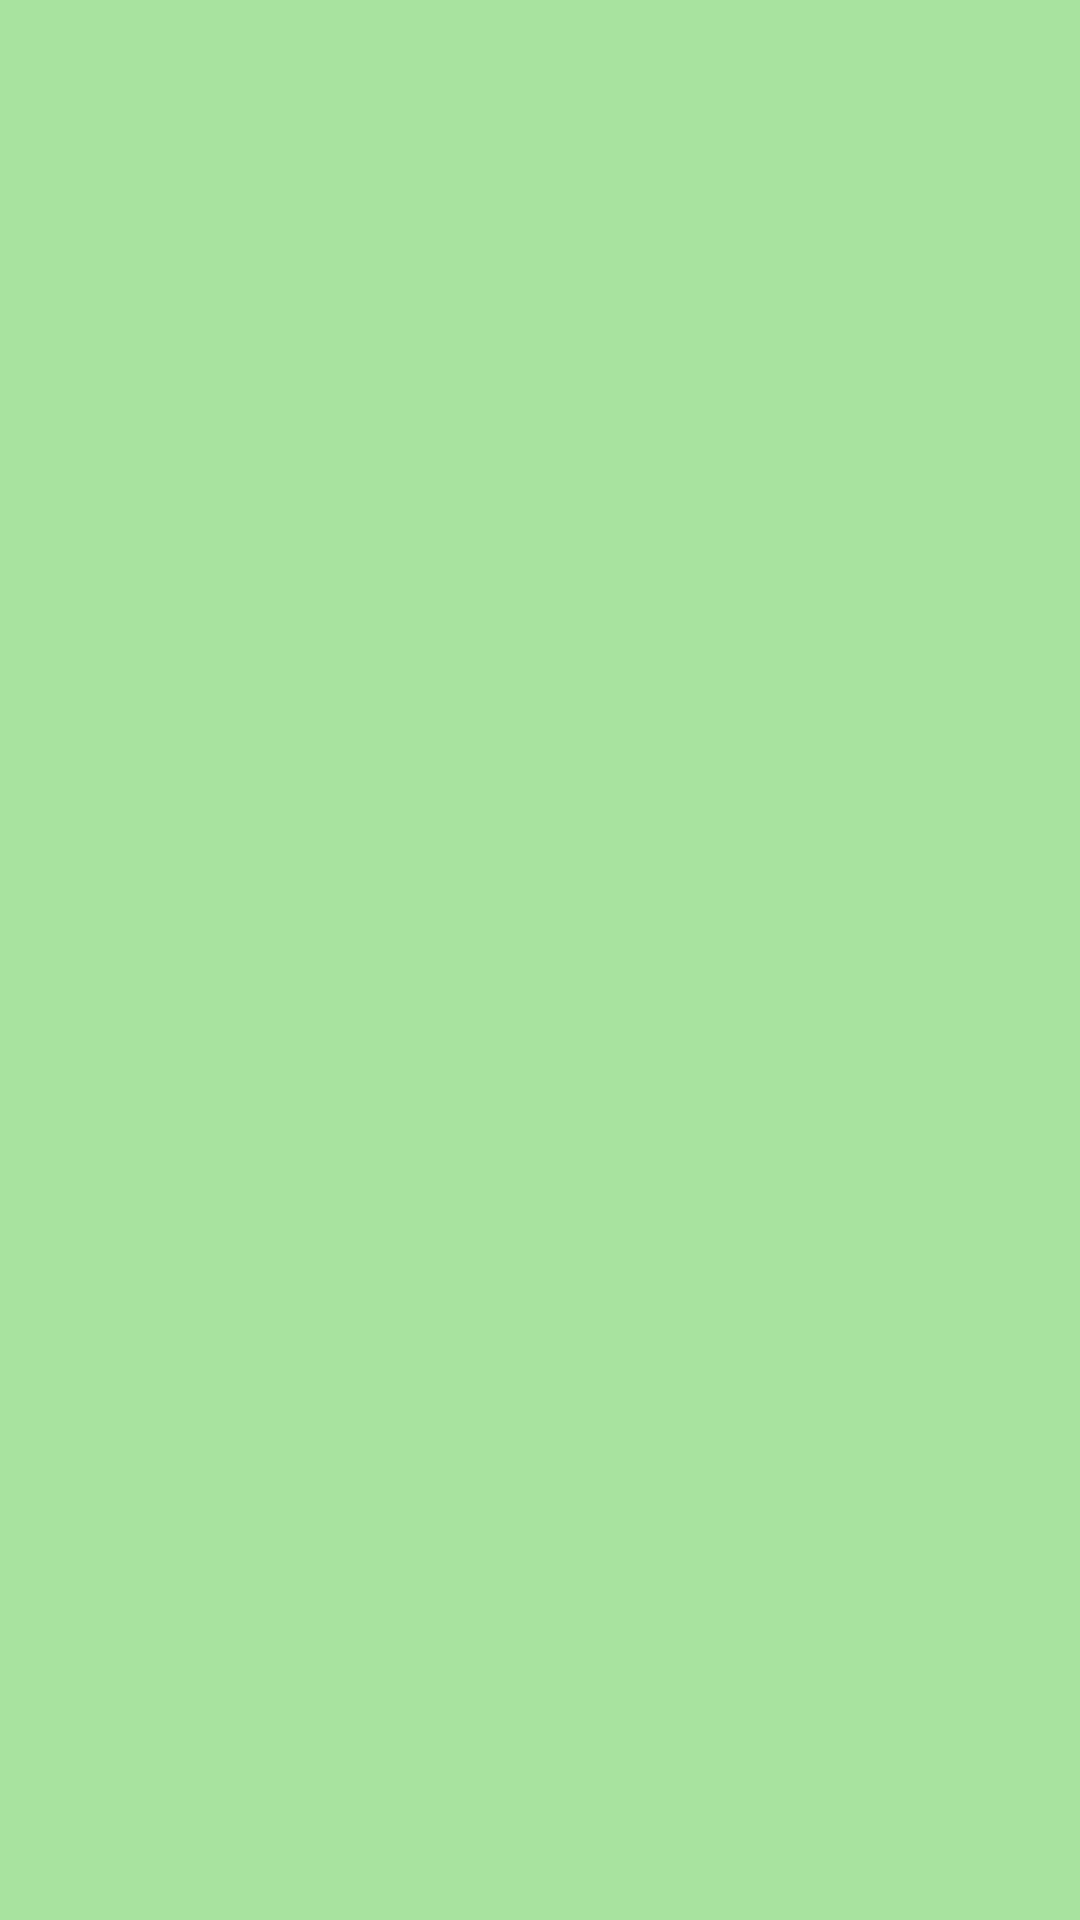 1080x1920 Granny Smith Apple Solid Color Background